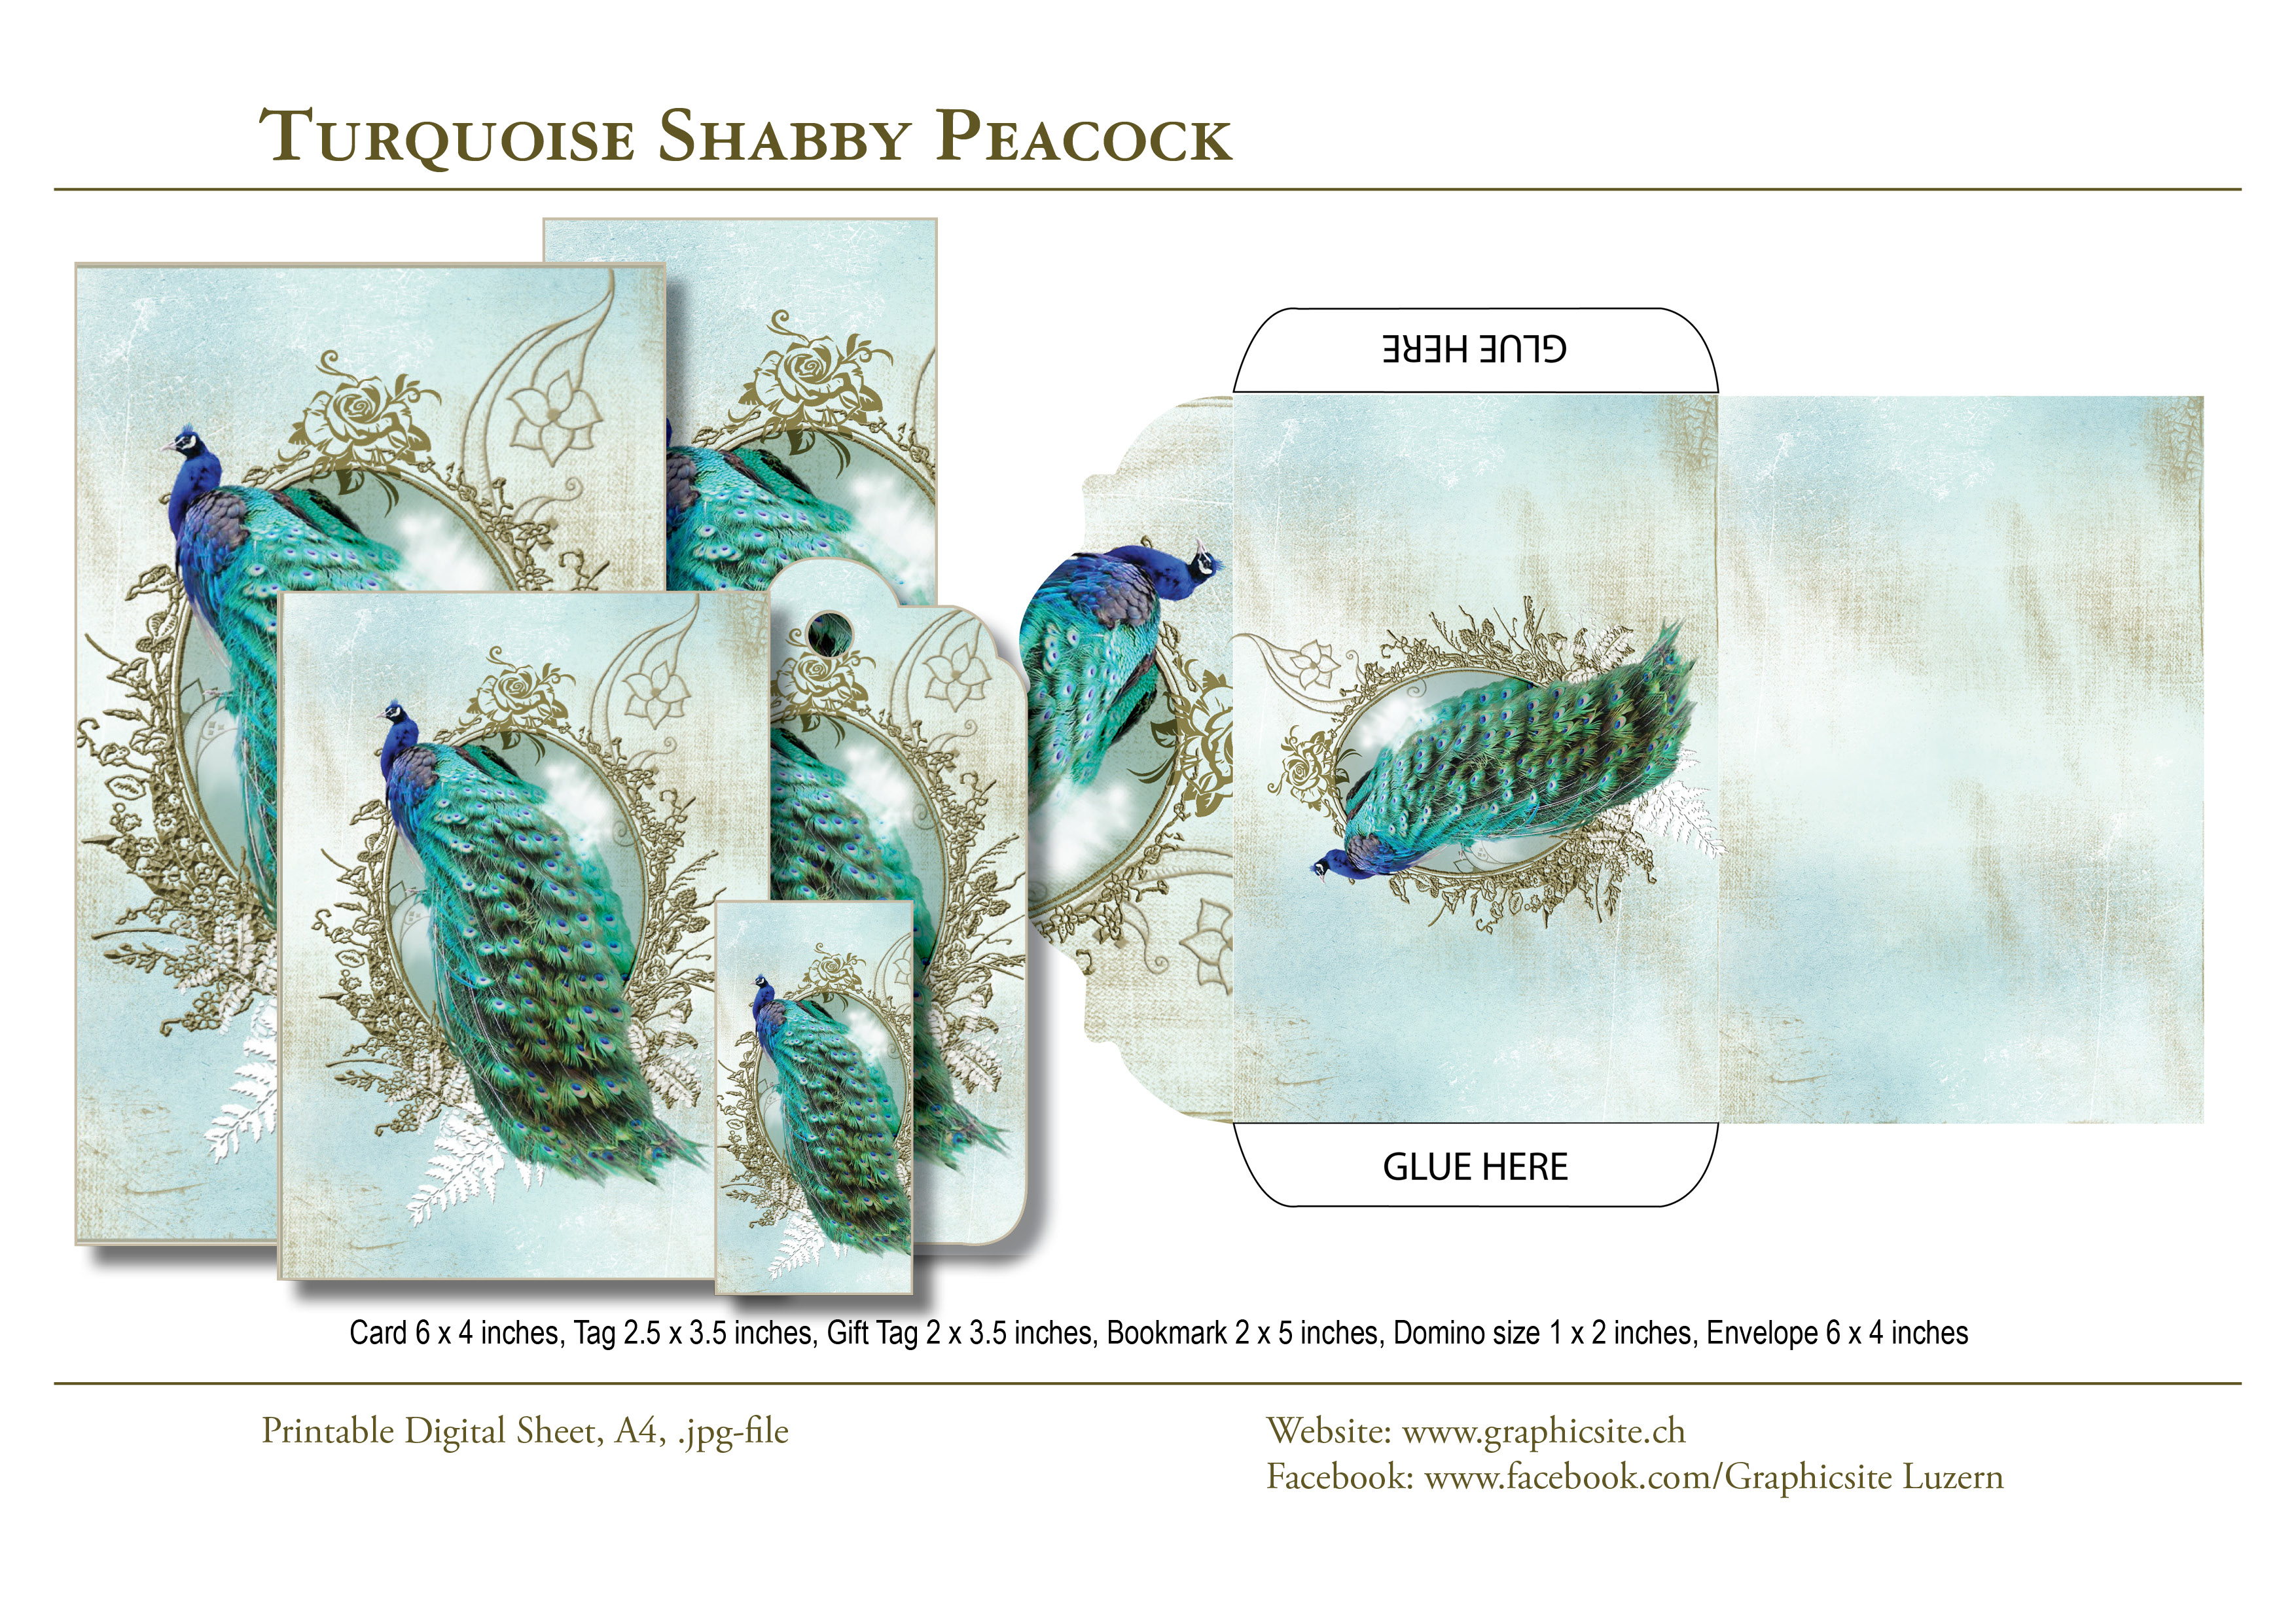 Printable Digital Sheets - Collections - Shabby Peacock